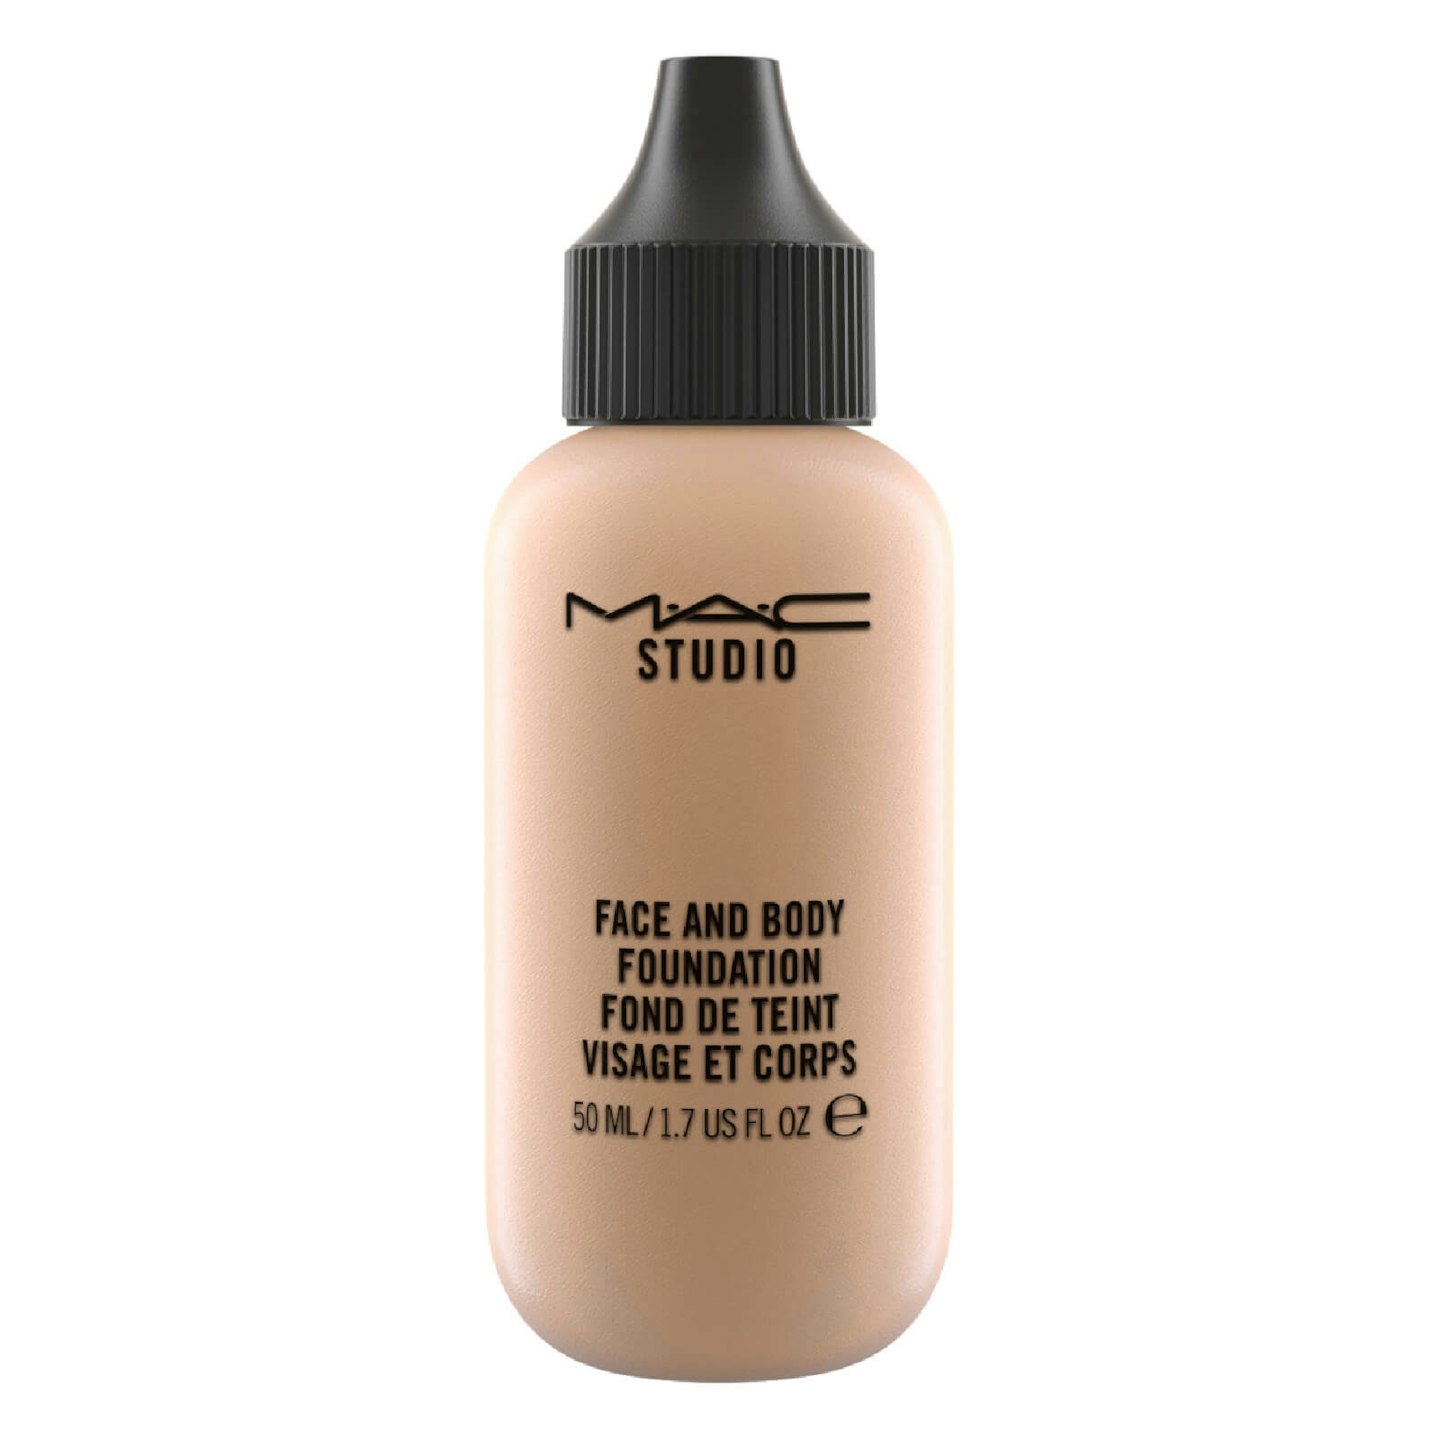 MAC Studio Face and Body Foundation, £27